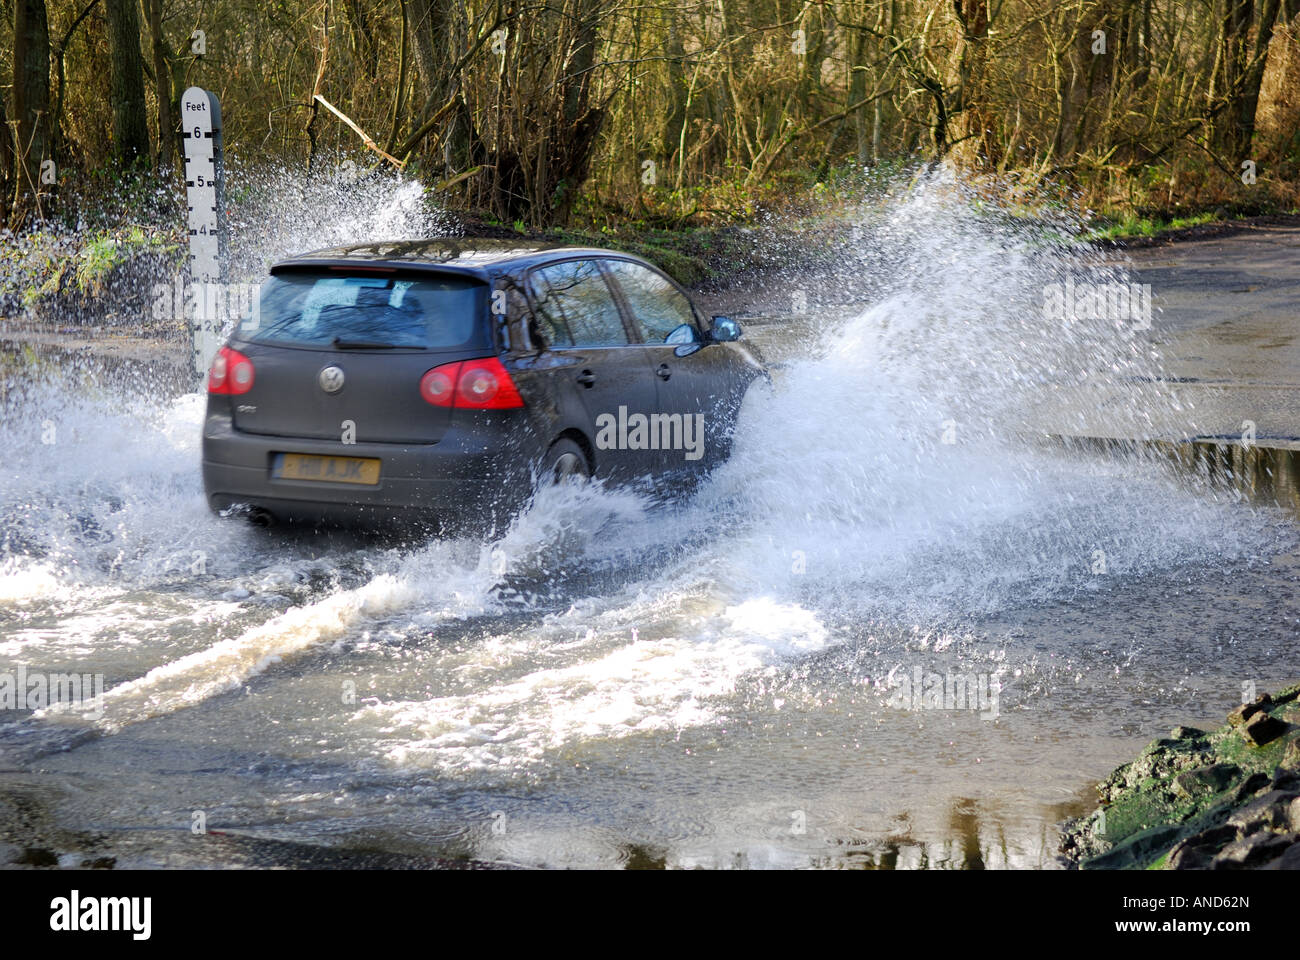 Vw car passing through water ford. Stock Photo